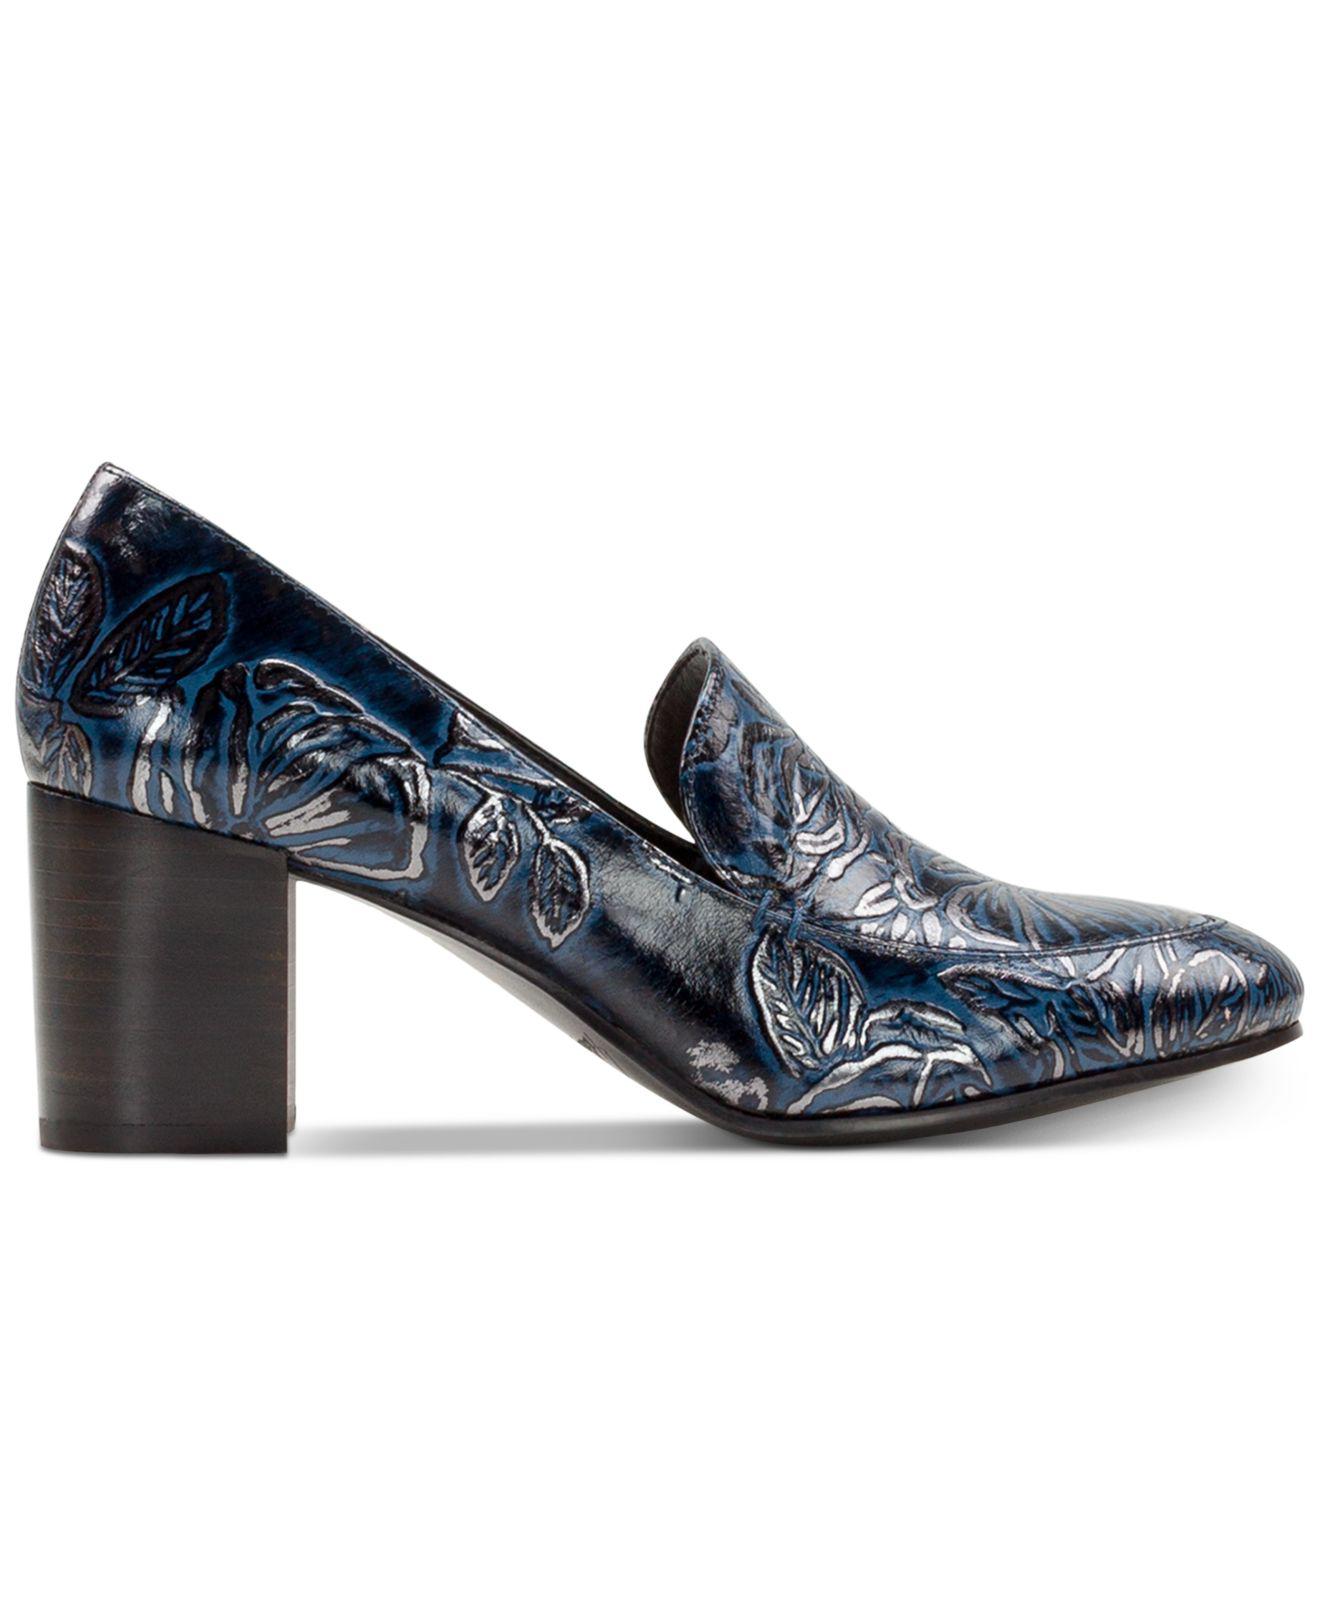 Patricia Nash Leather Martina Tailored Pumps in Navy (Blue